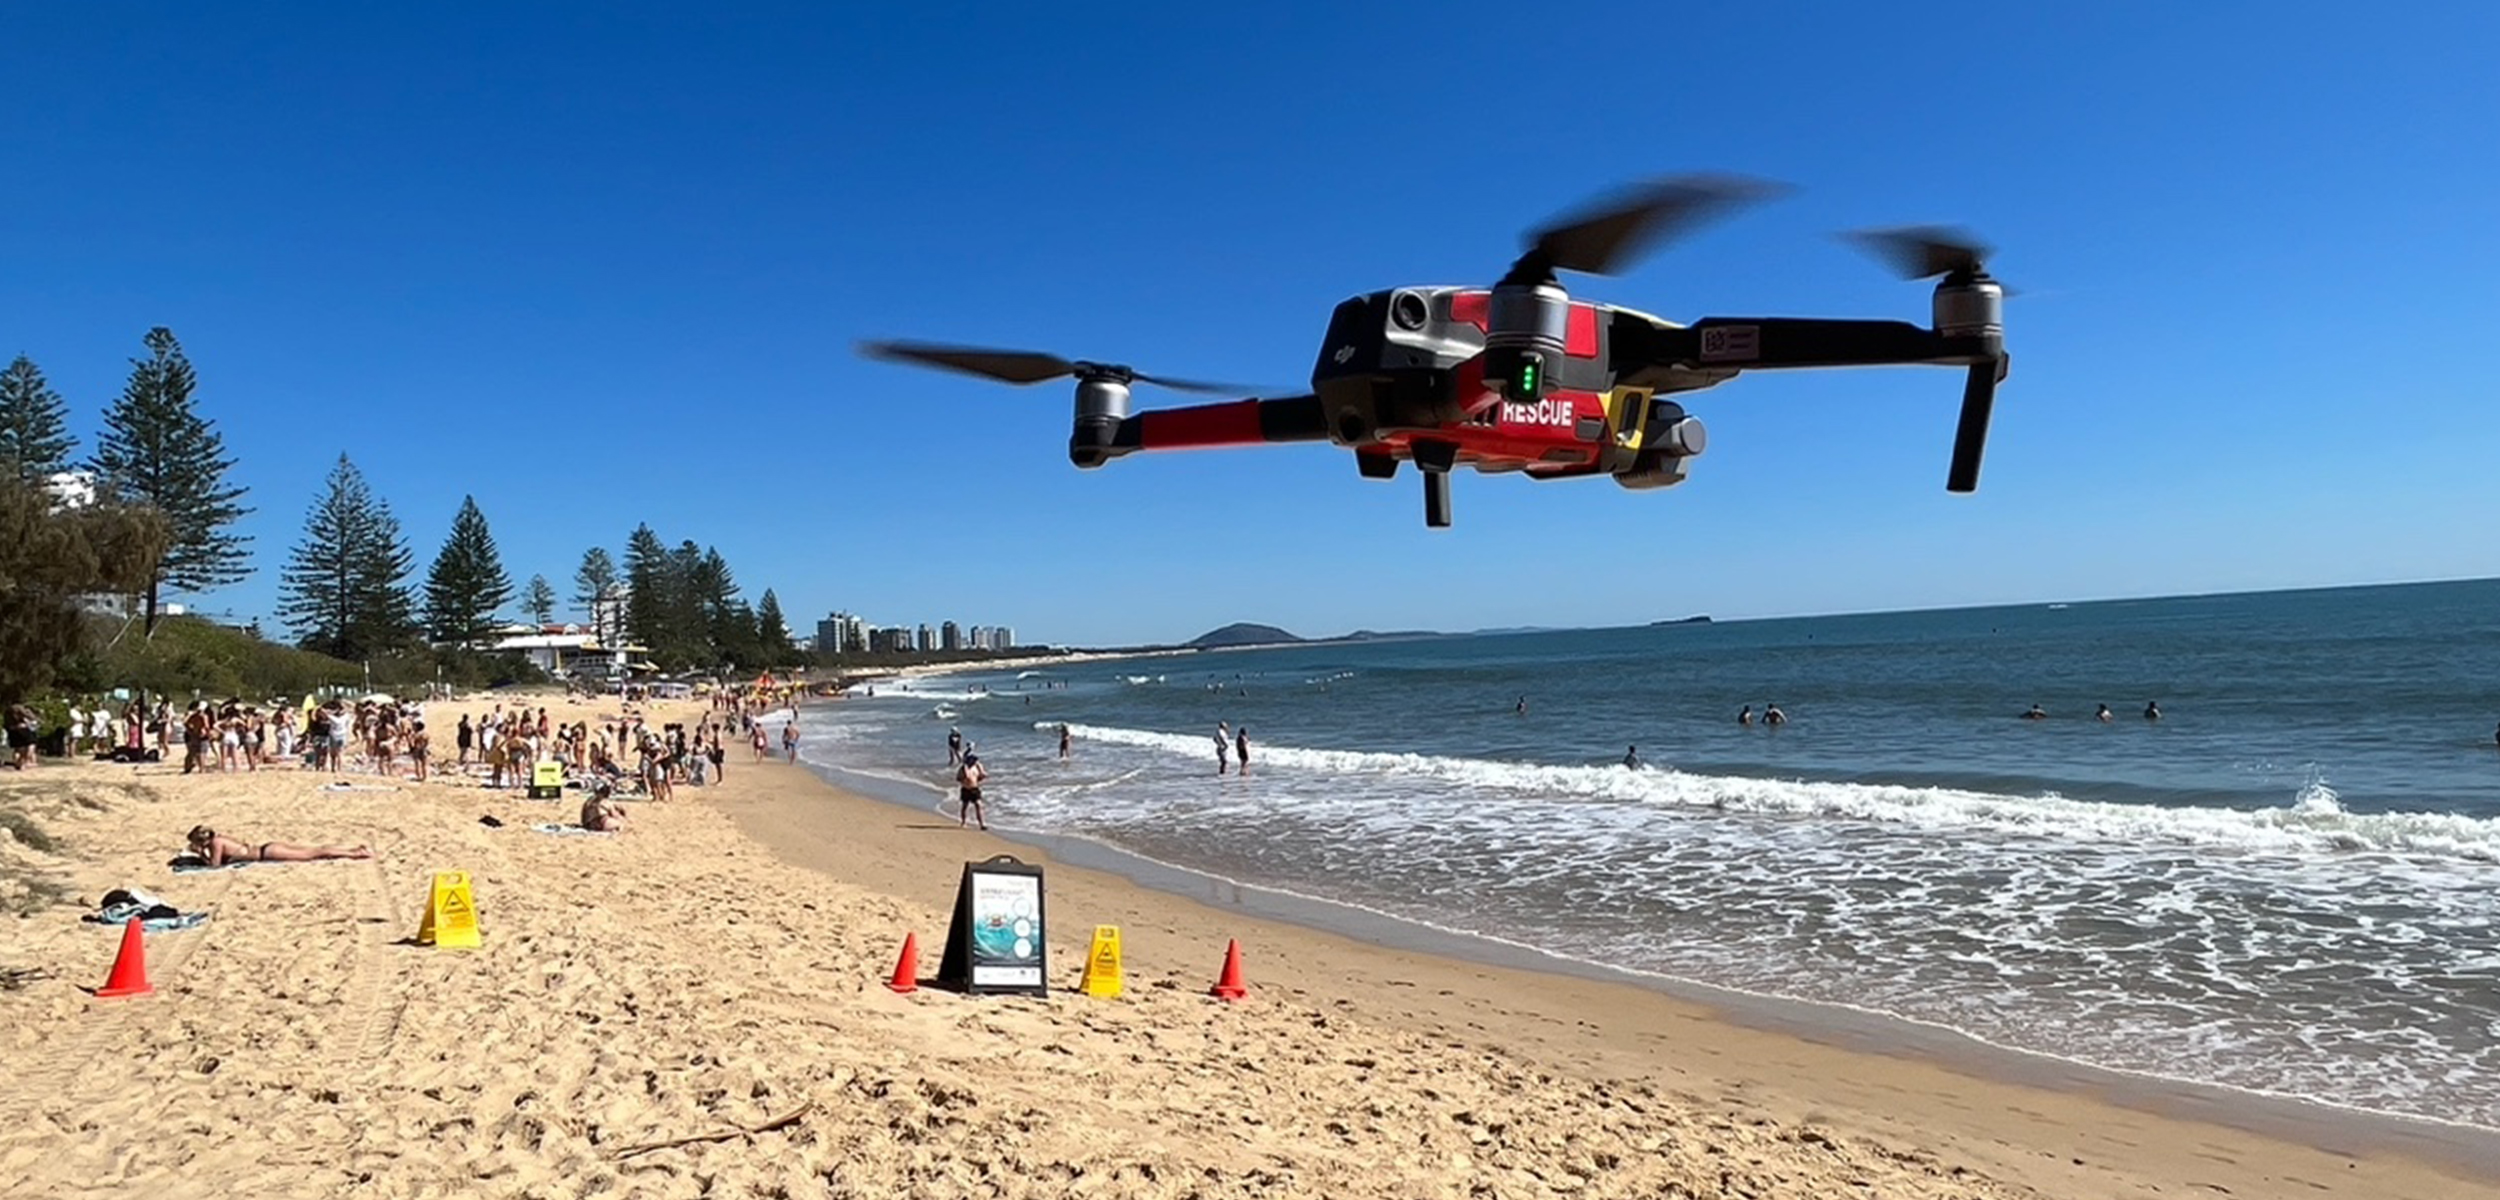 A red drone flys in the blue sky above a yellowy beach with the turquoise ocean below.